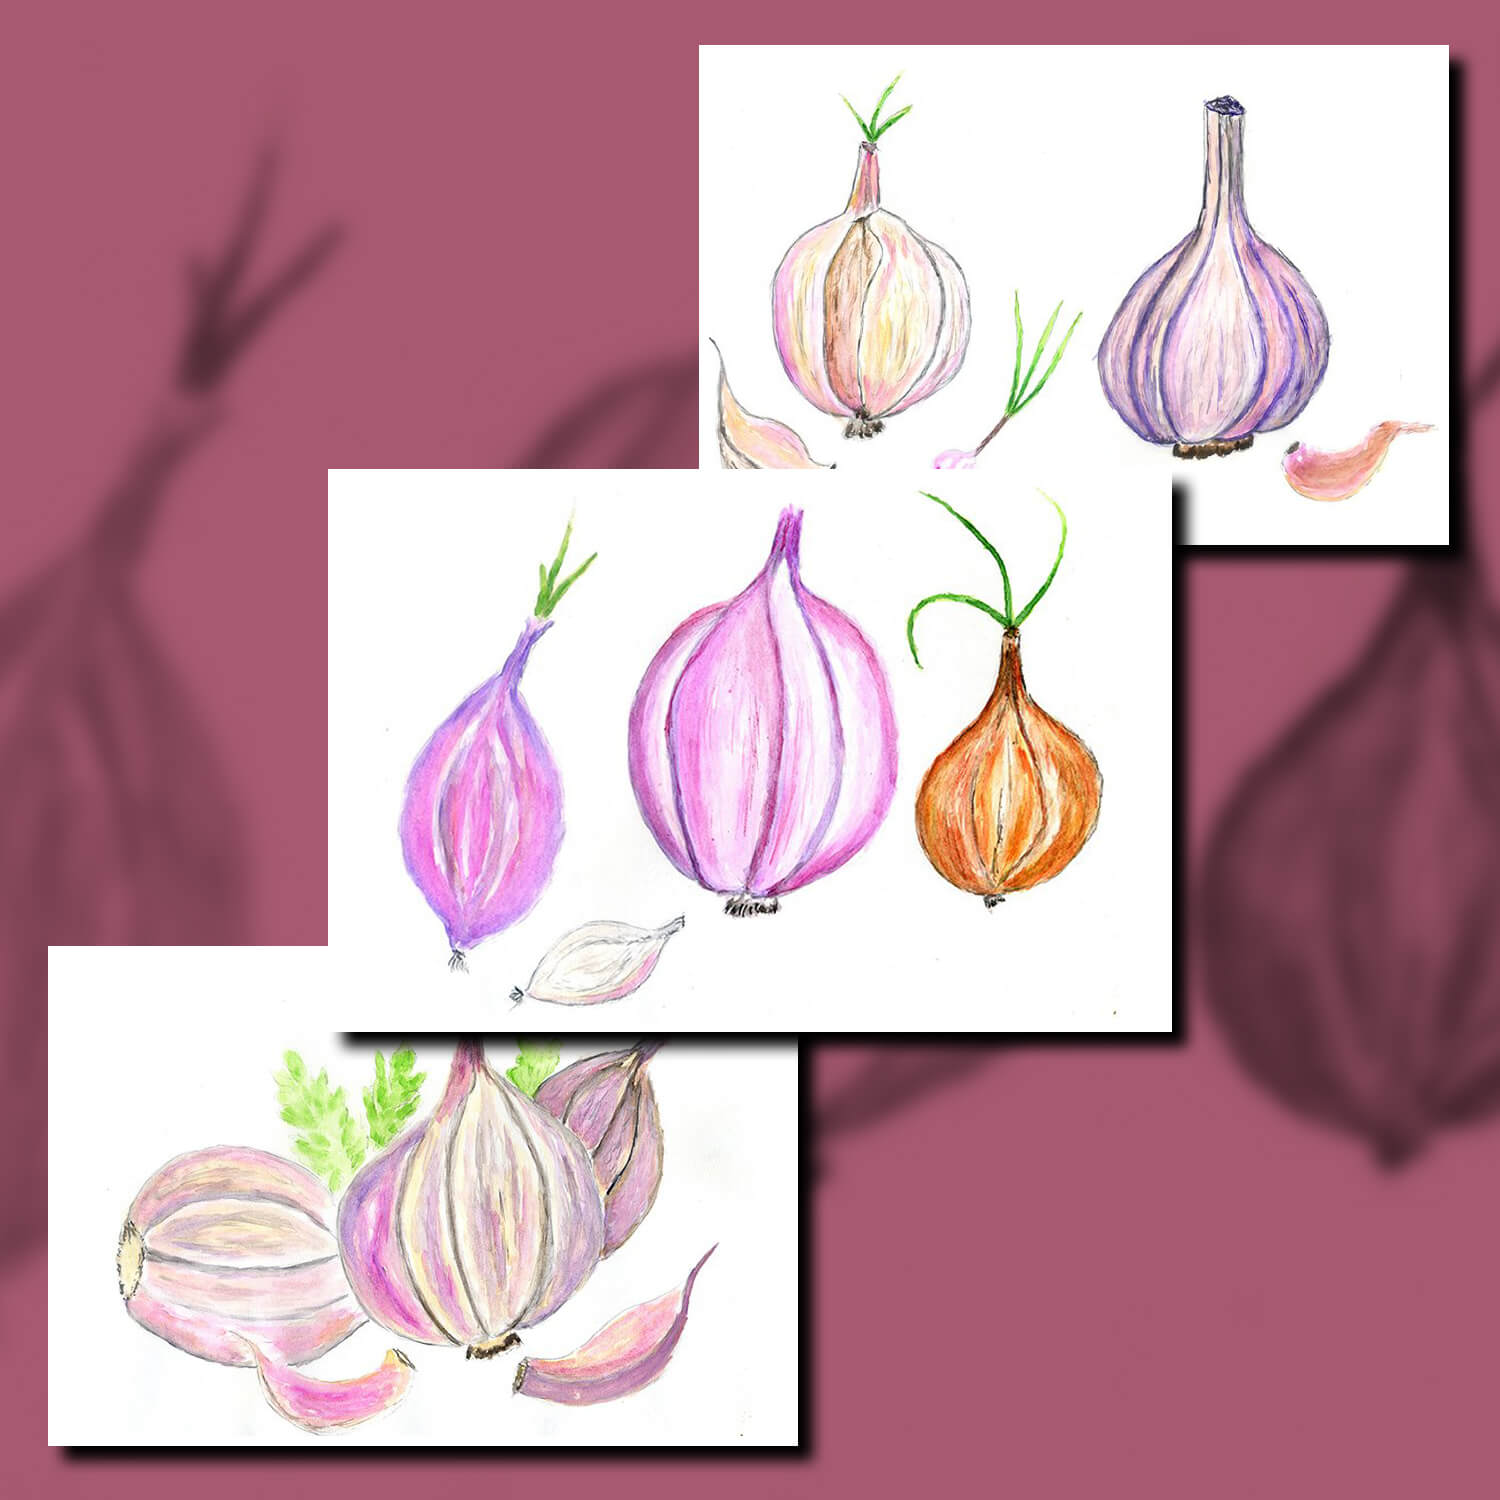 The image of garlic and onion is made with pencils.